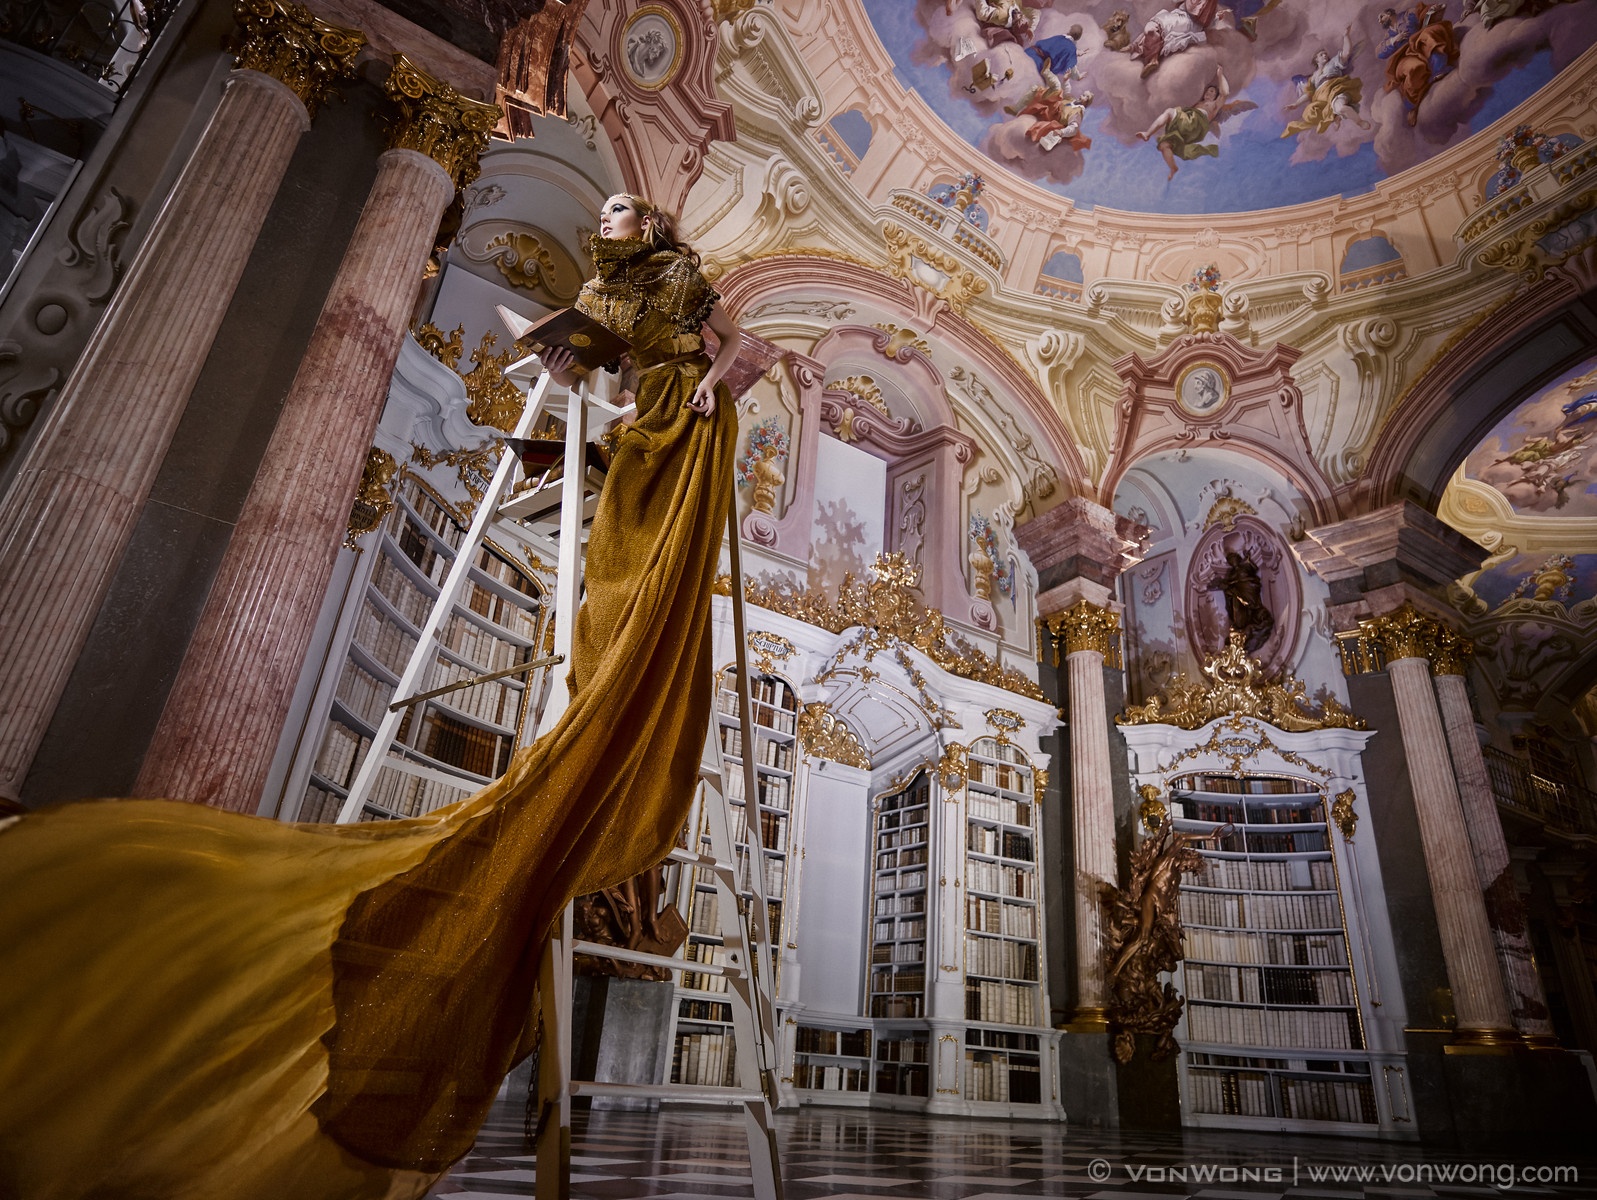 Dream Come True: A Fairytale Photo Shoot in the Oldest Monastic Library on Earth